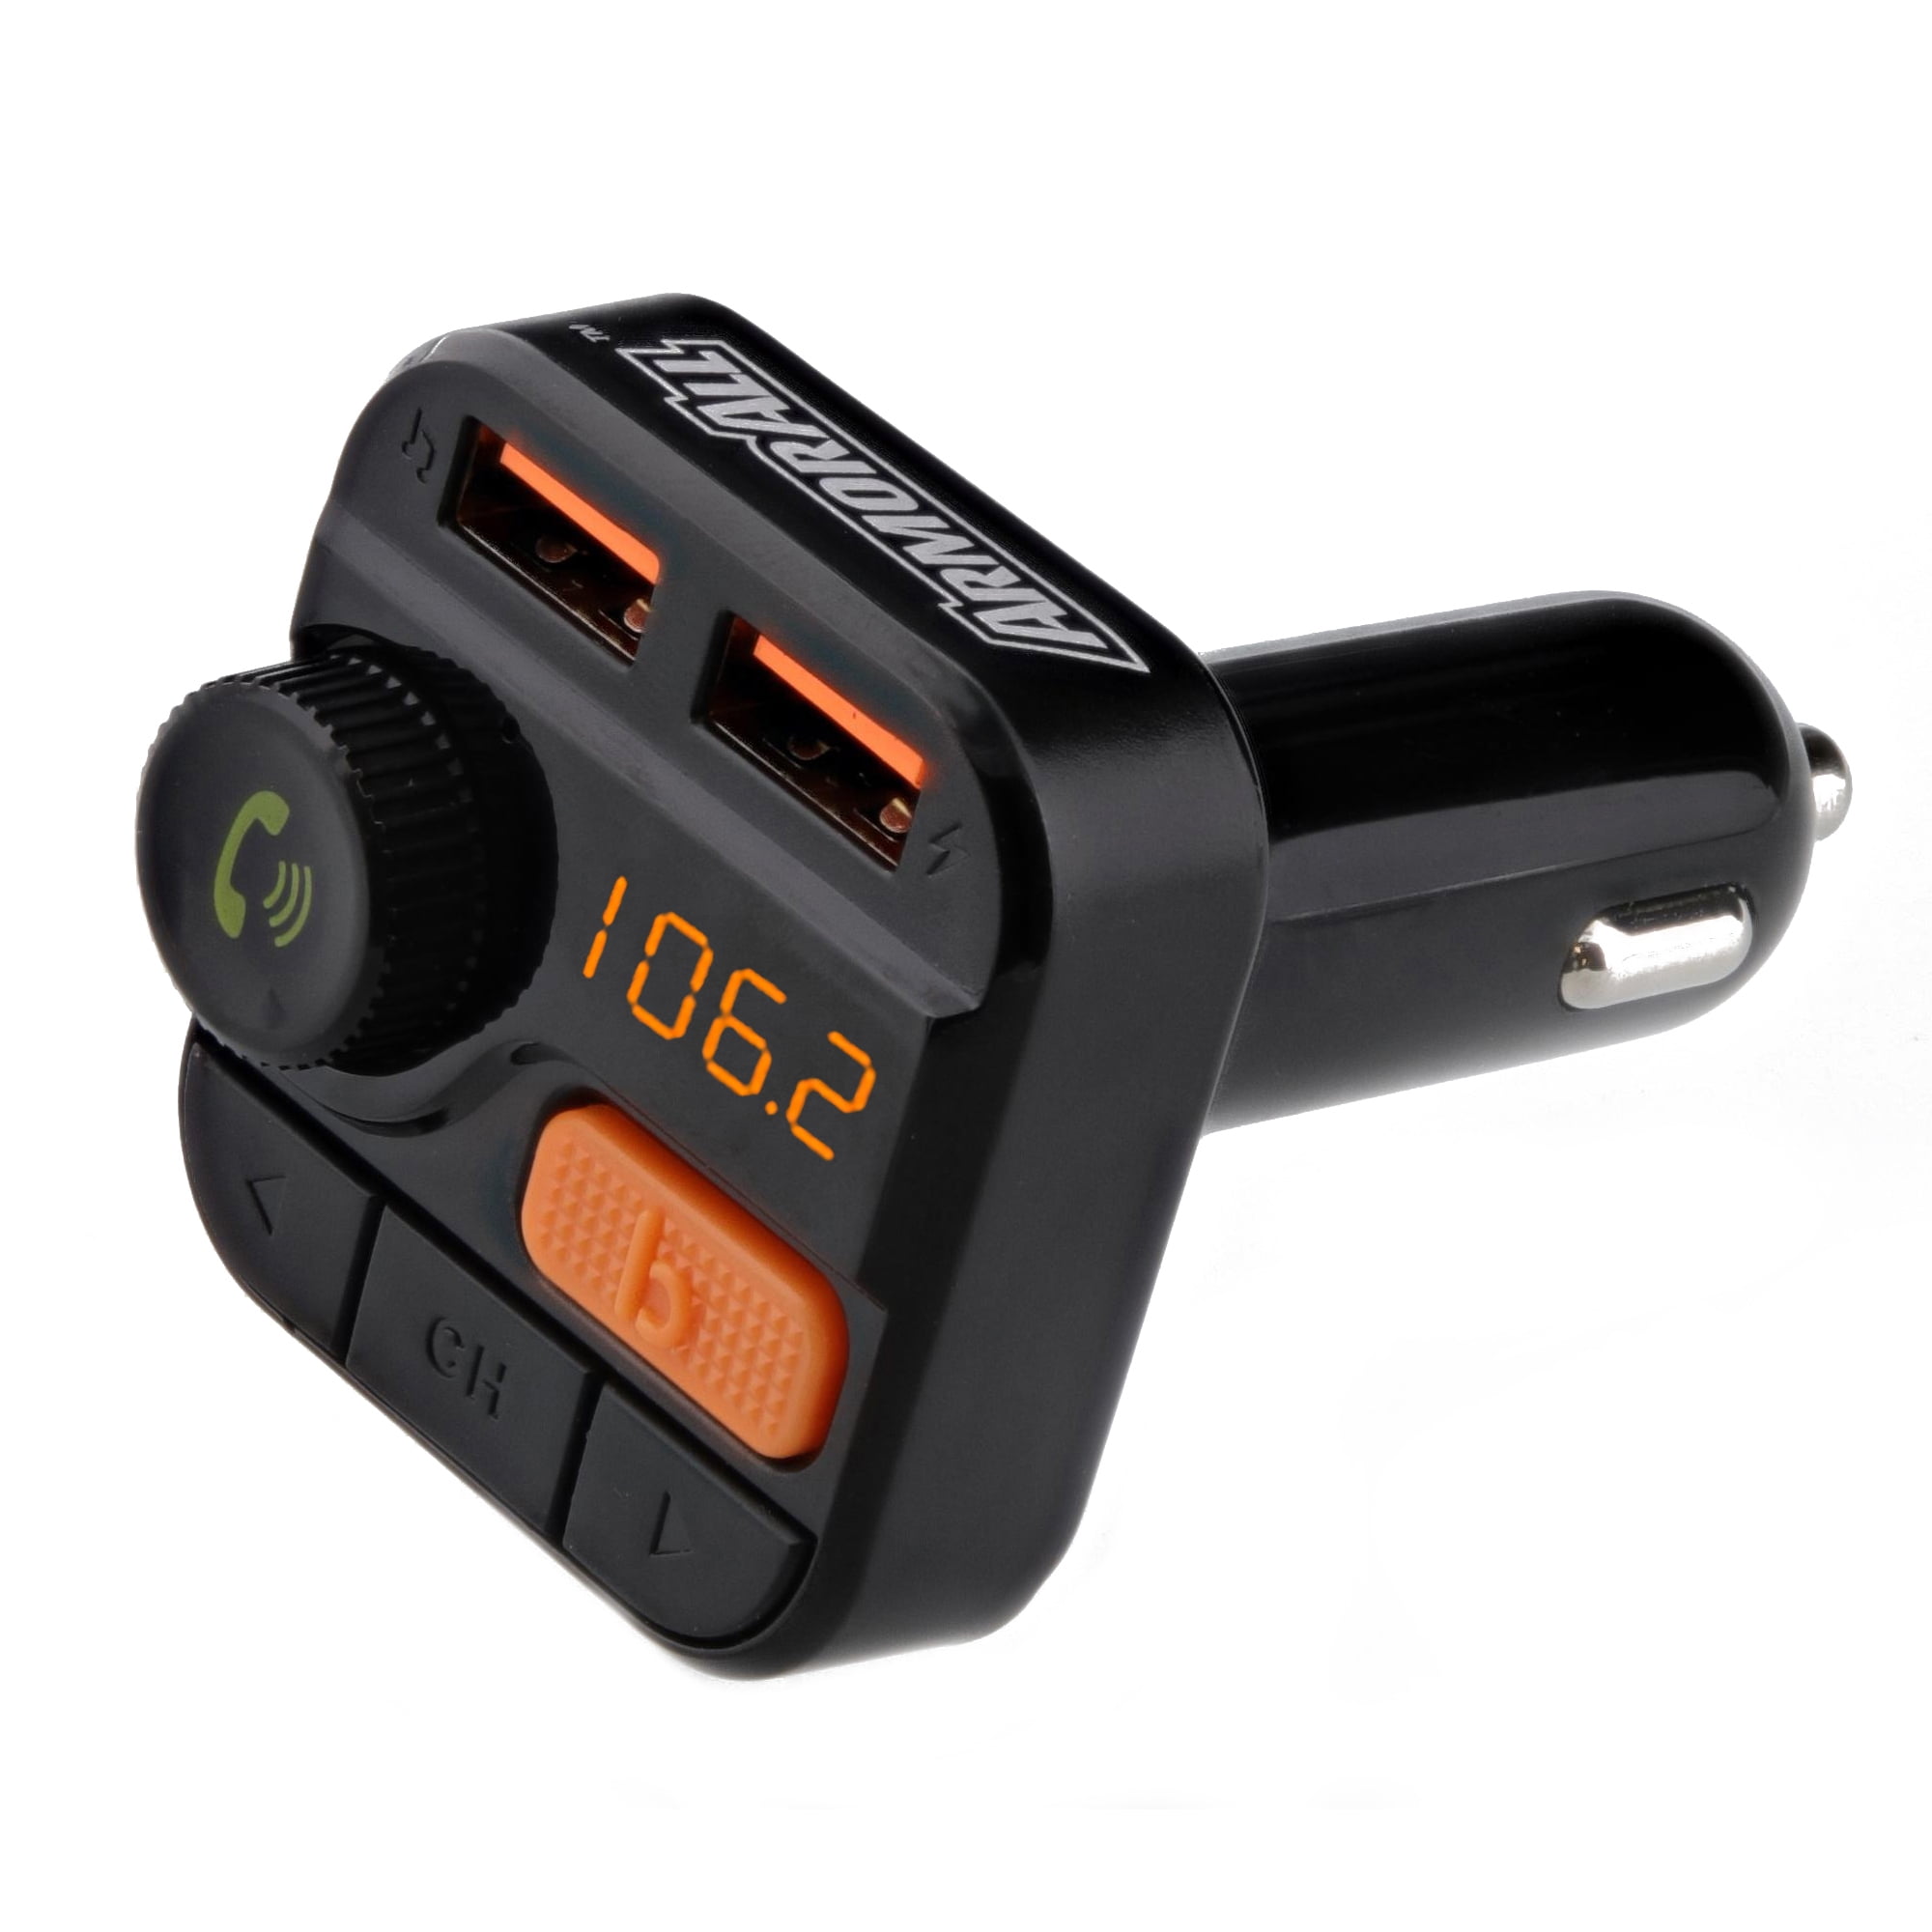 Bluetooth FM transmitter with wireless calling and two USB ports – Agiler  USA